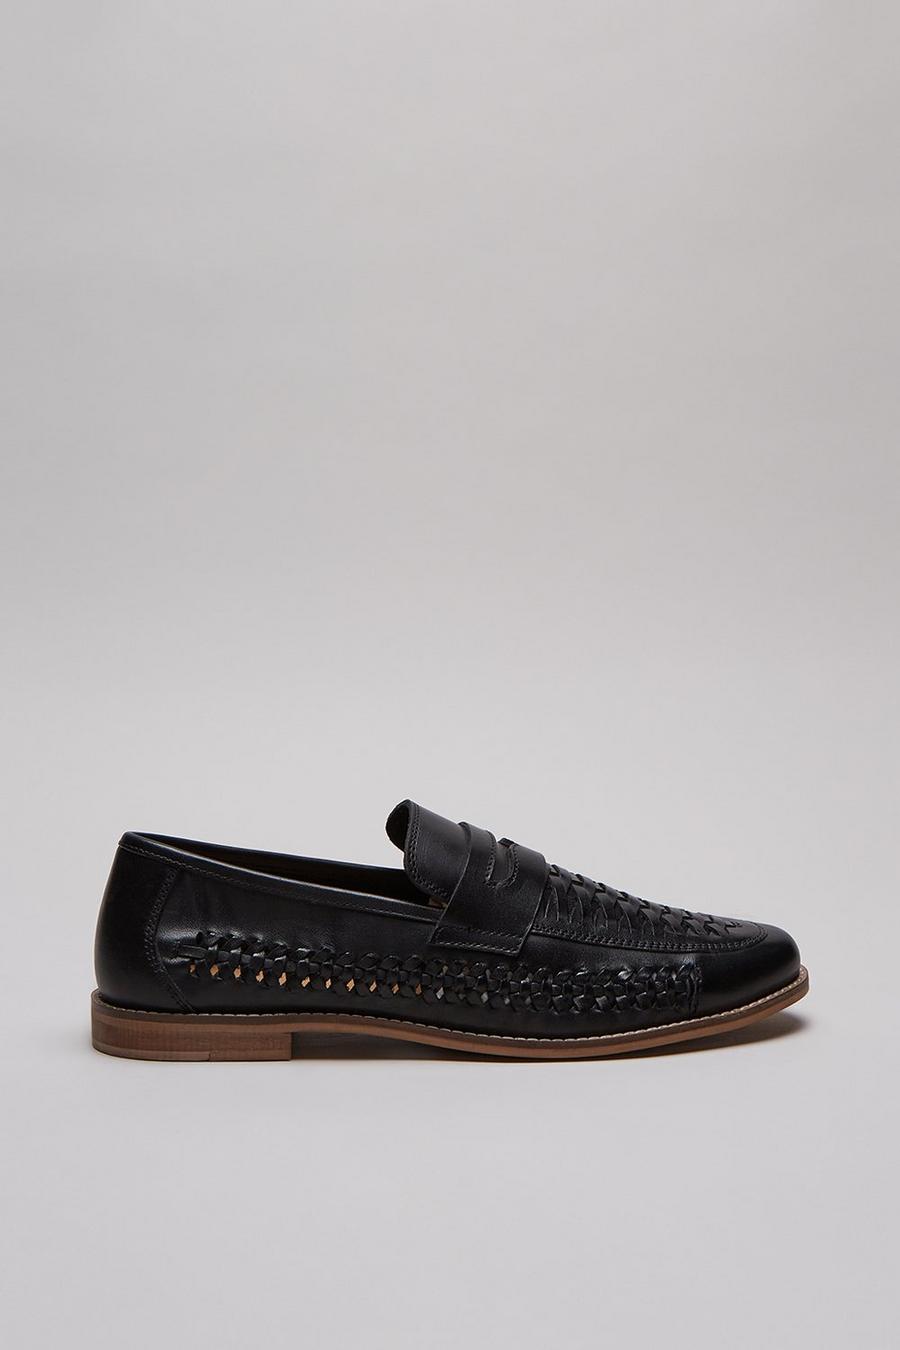 Black Leather Woven Loafer